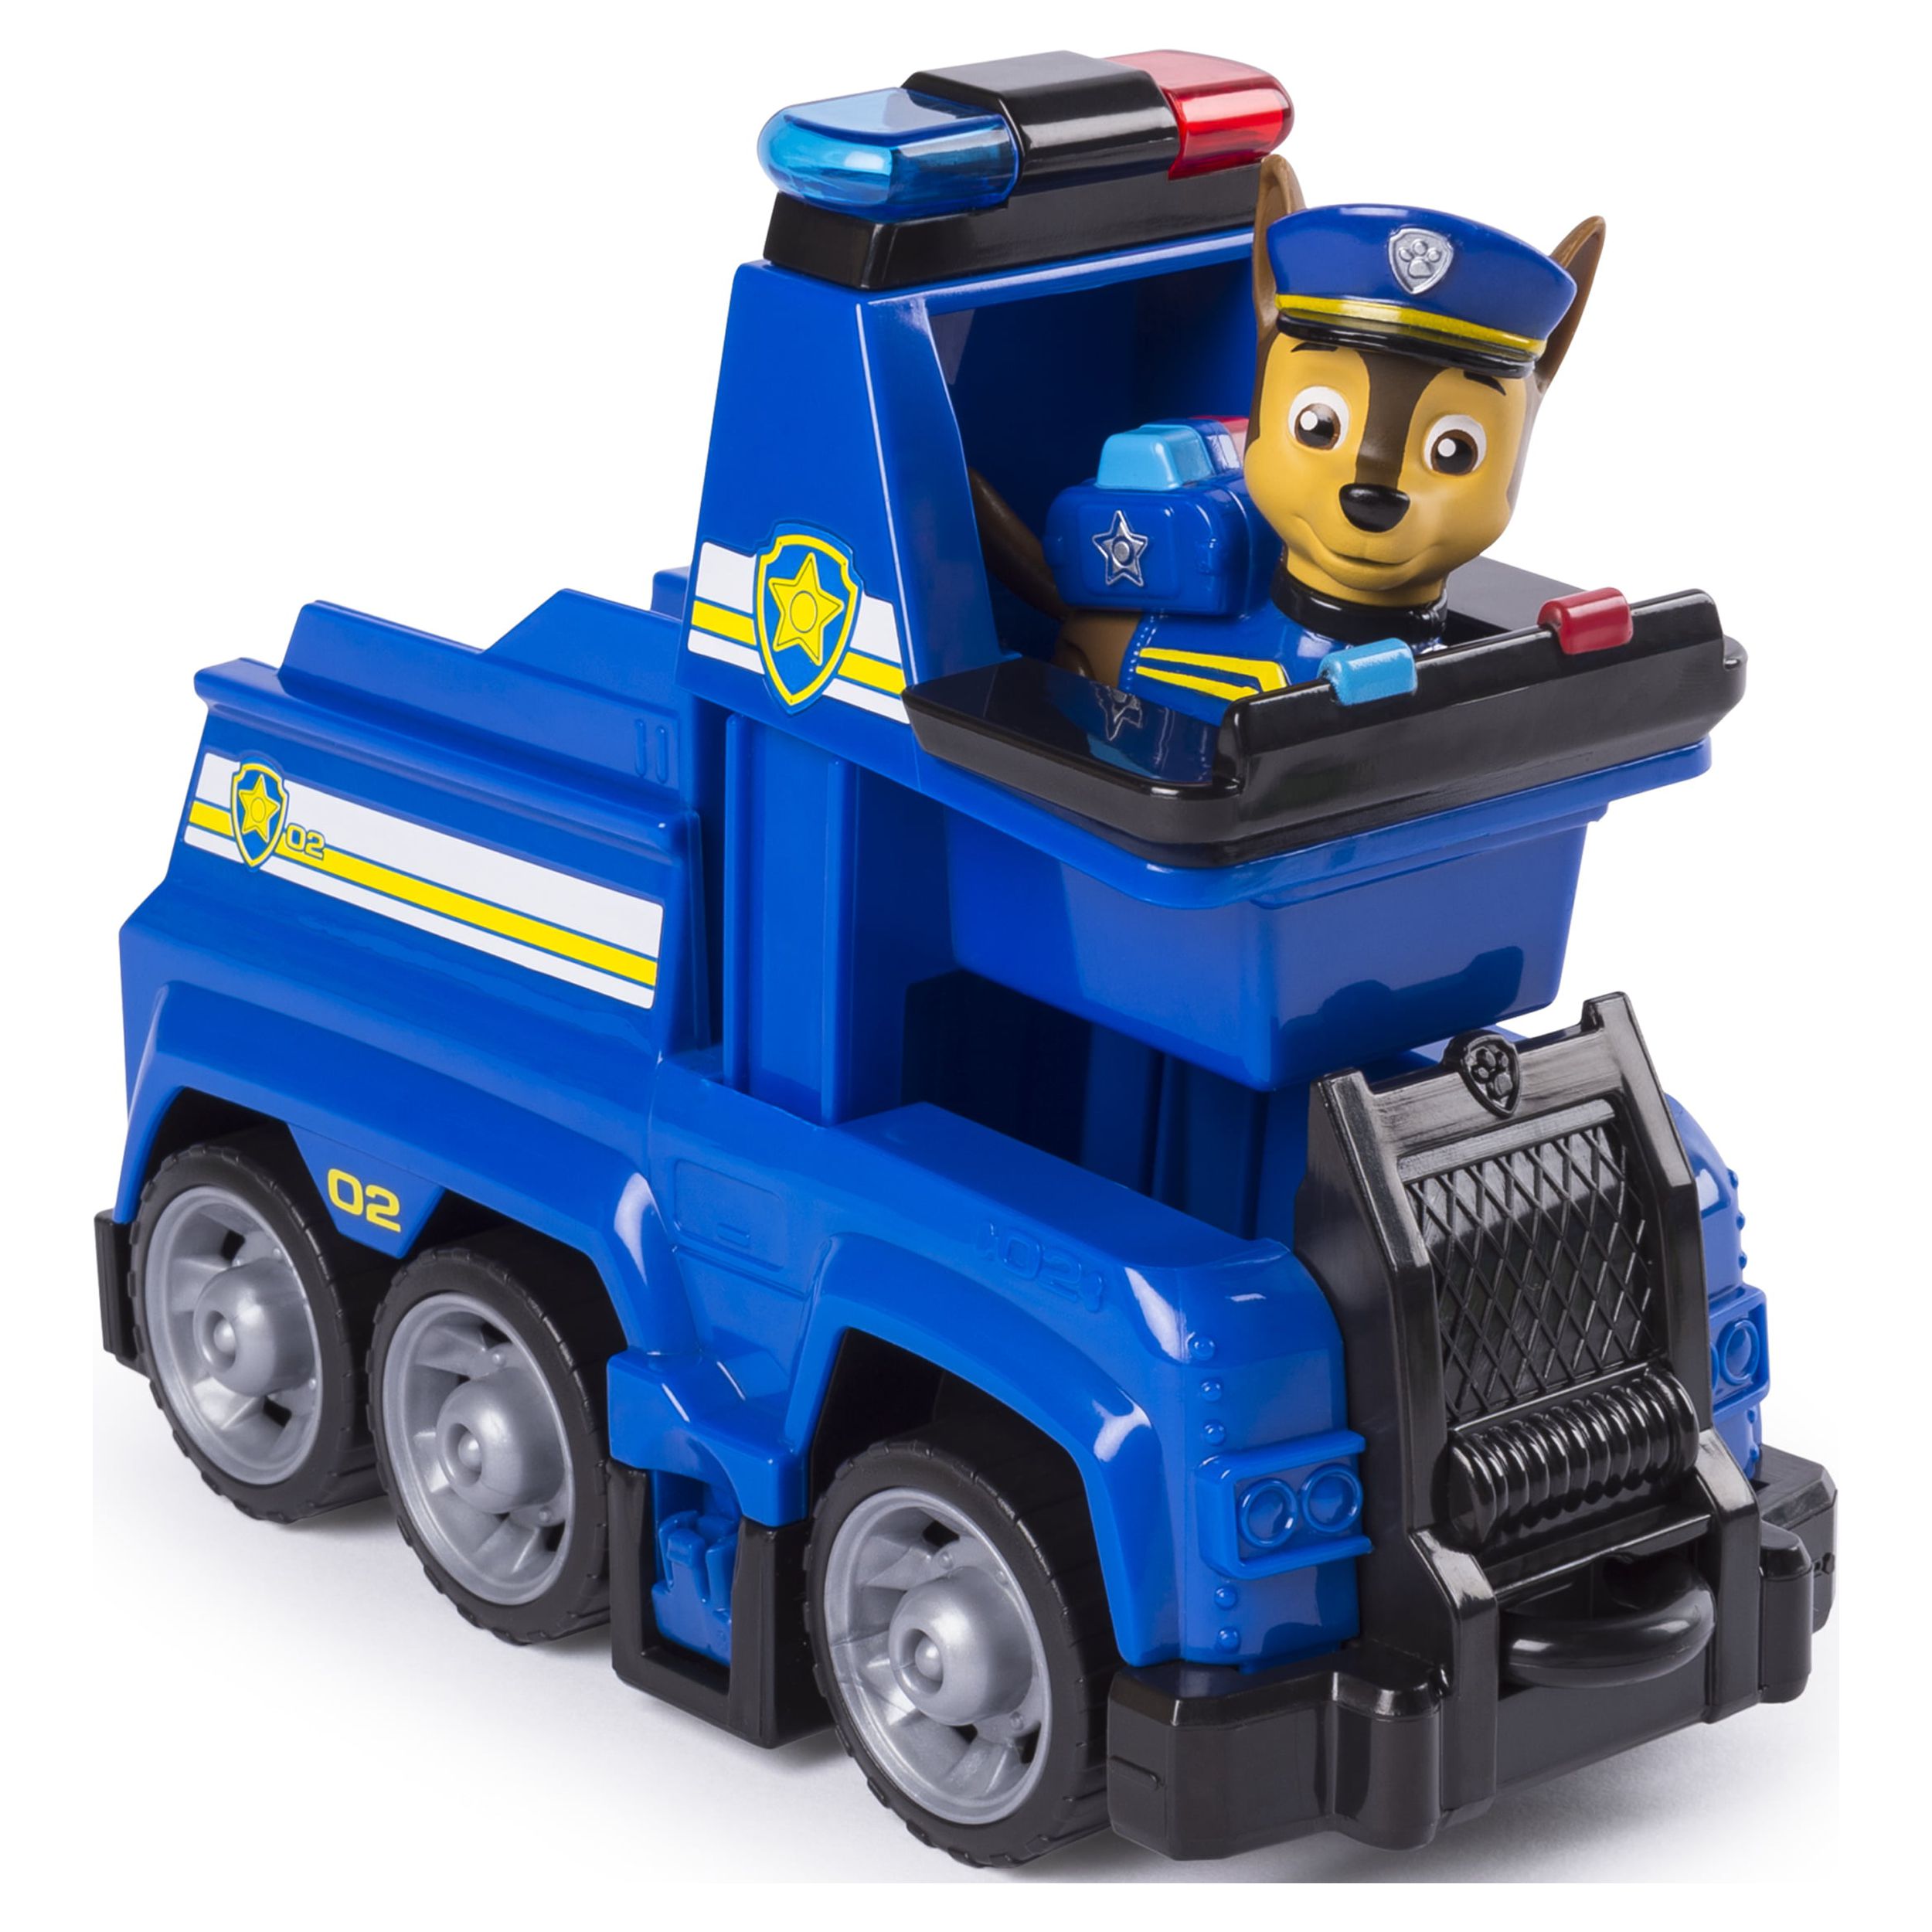 PAW Patrol Ultimate Rescue, Chase’s Ultimate Rescue Police Cruiser Vehicle, for Ages 3 and up - image 3 of 7